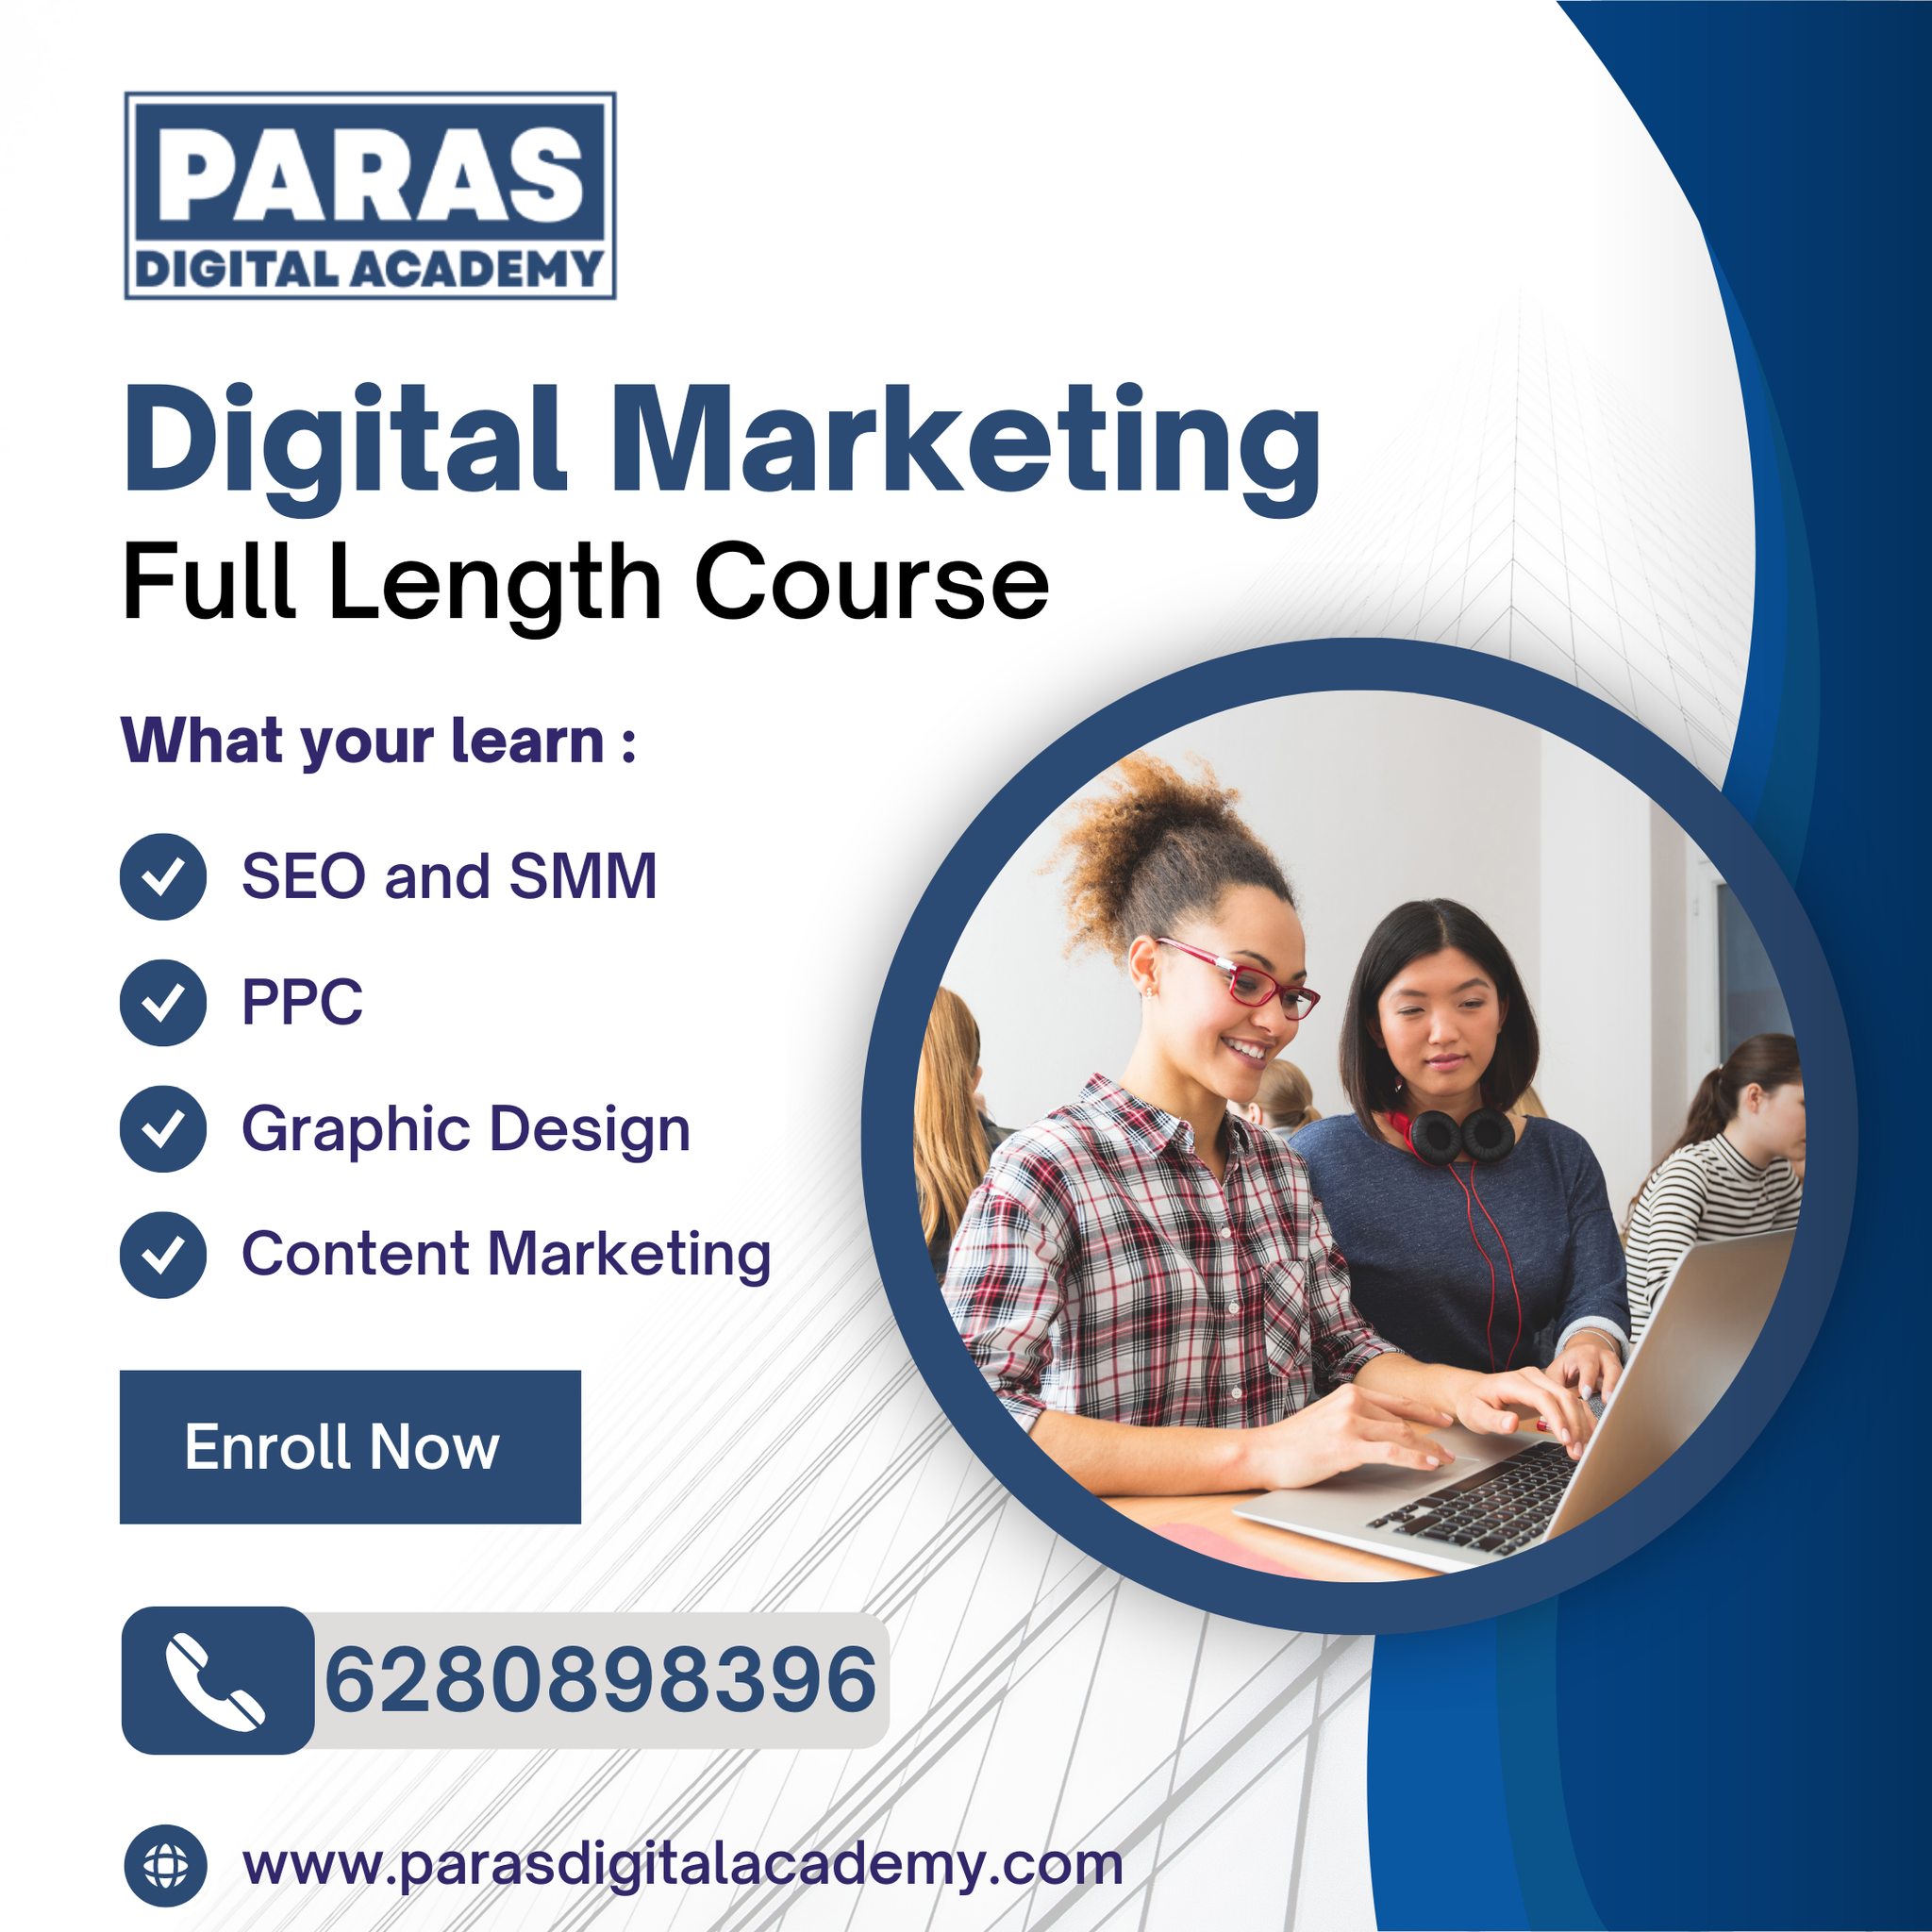 Digital Marketing Coaching in Mohali | Paras Digital Academy,Chandigarh City,Educational & Institute,Professional Courses